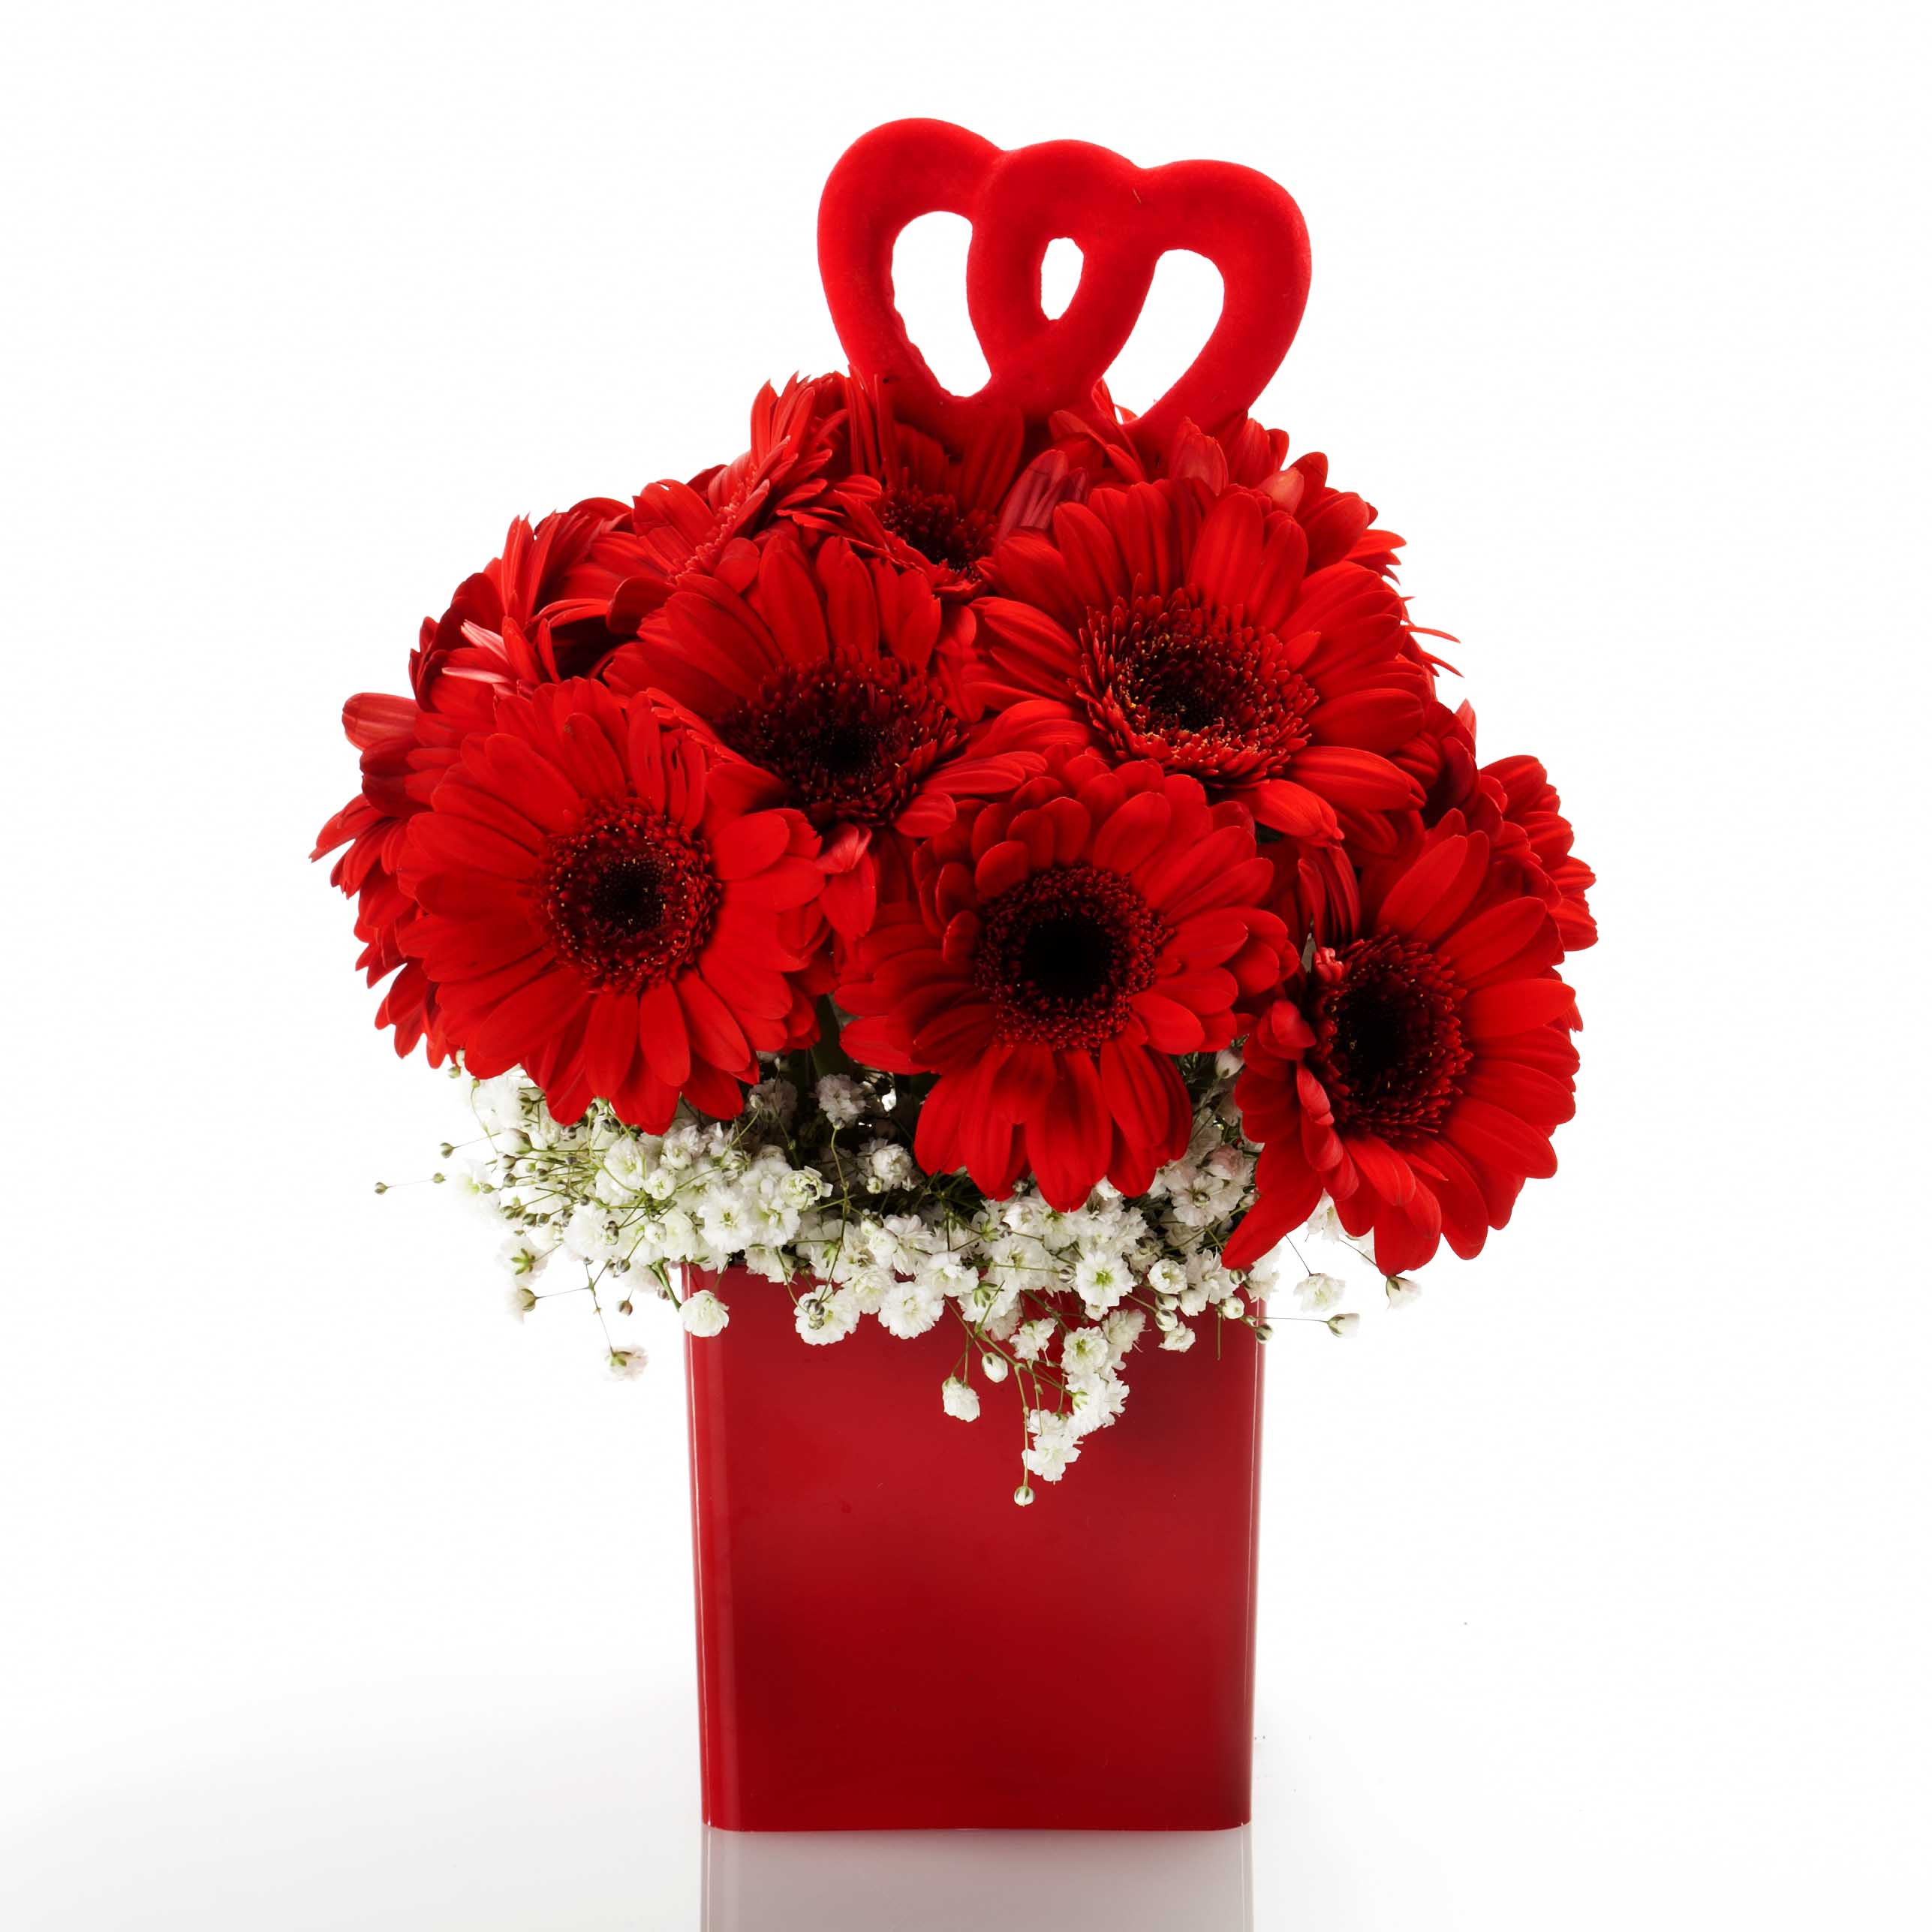 Love Explosion with Gerberas